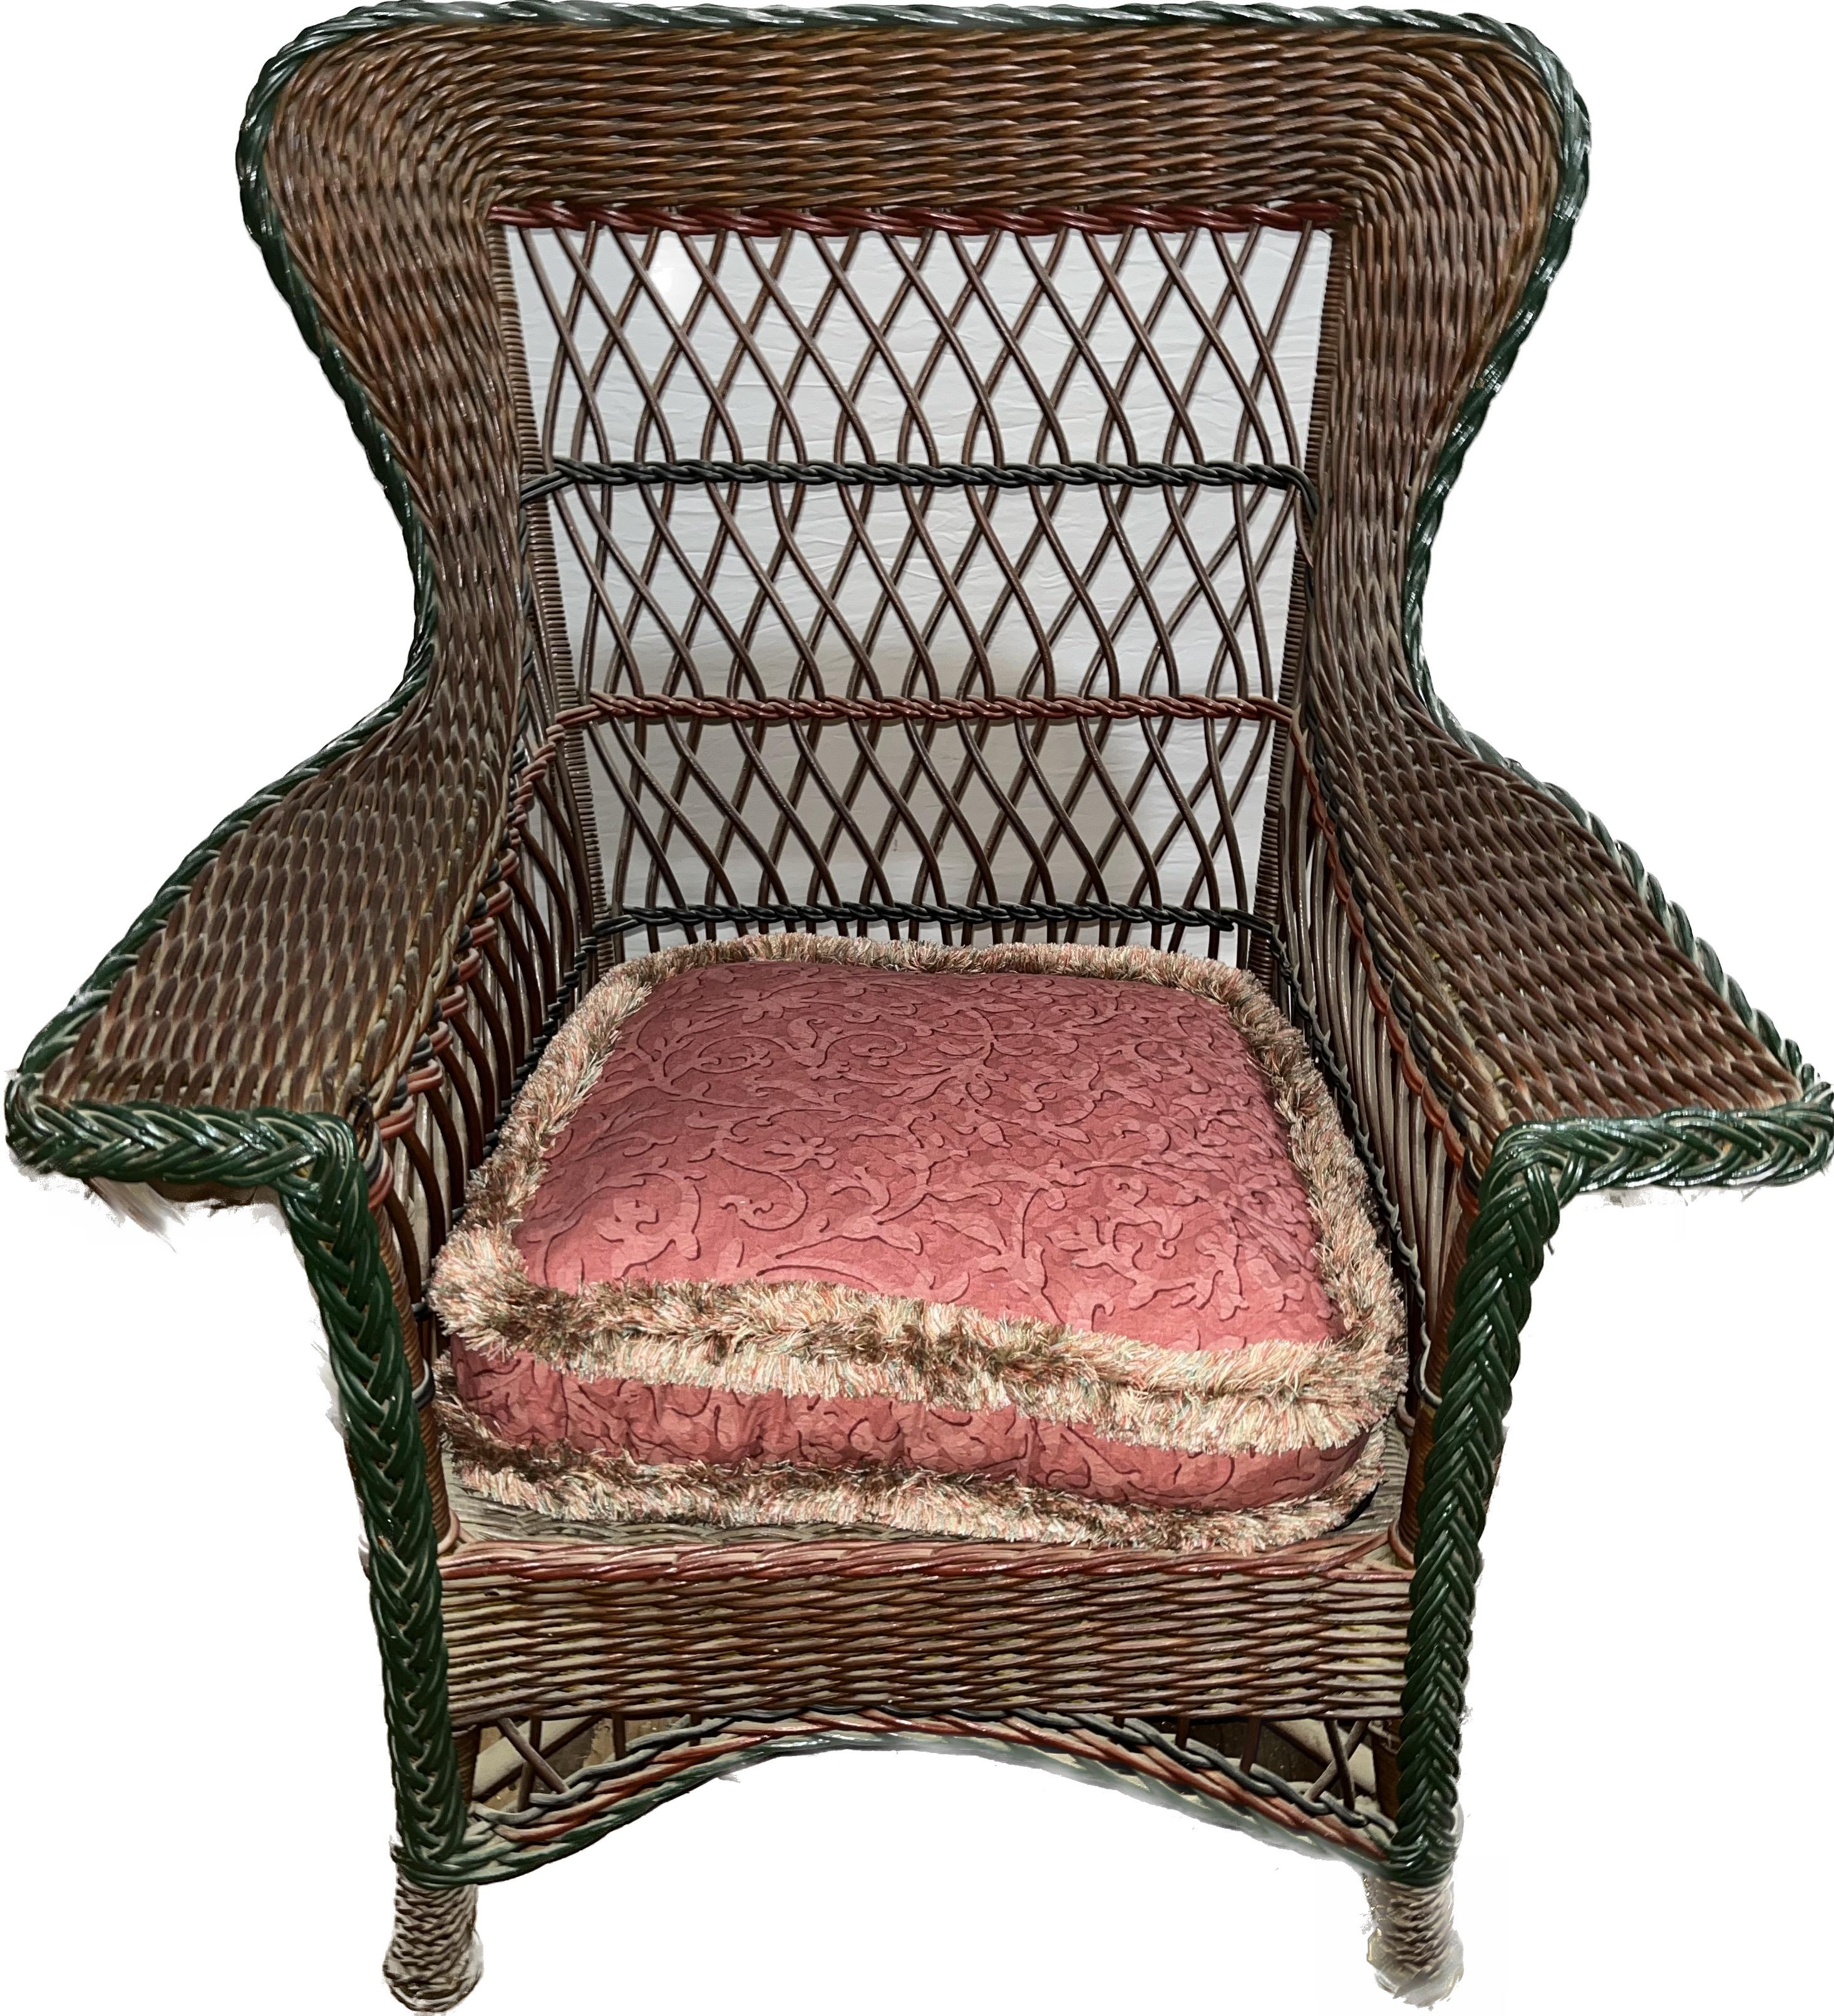 A beautiful, antique Heywood Wakefield, Bar Harbor style wicker wing chair, recently acquired from a private estate. It is done in natural finish with green accent trim, American, circa 1900-1910. Large and incredibly sturdy with lovely wide arms